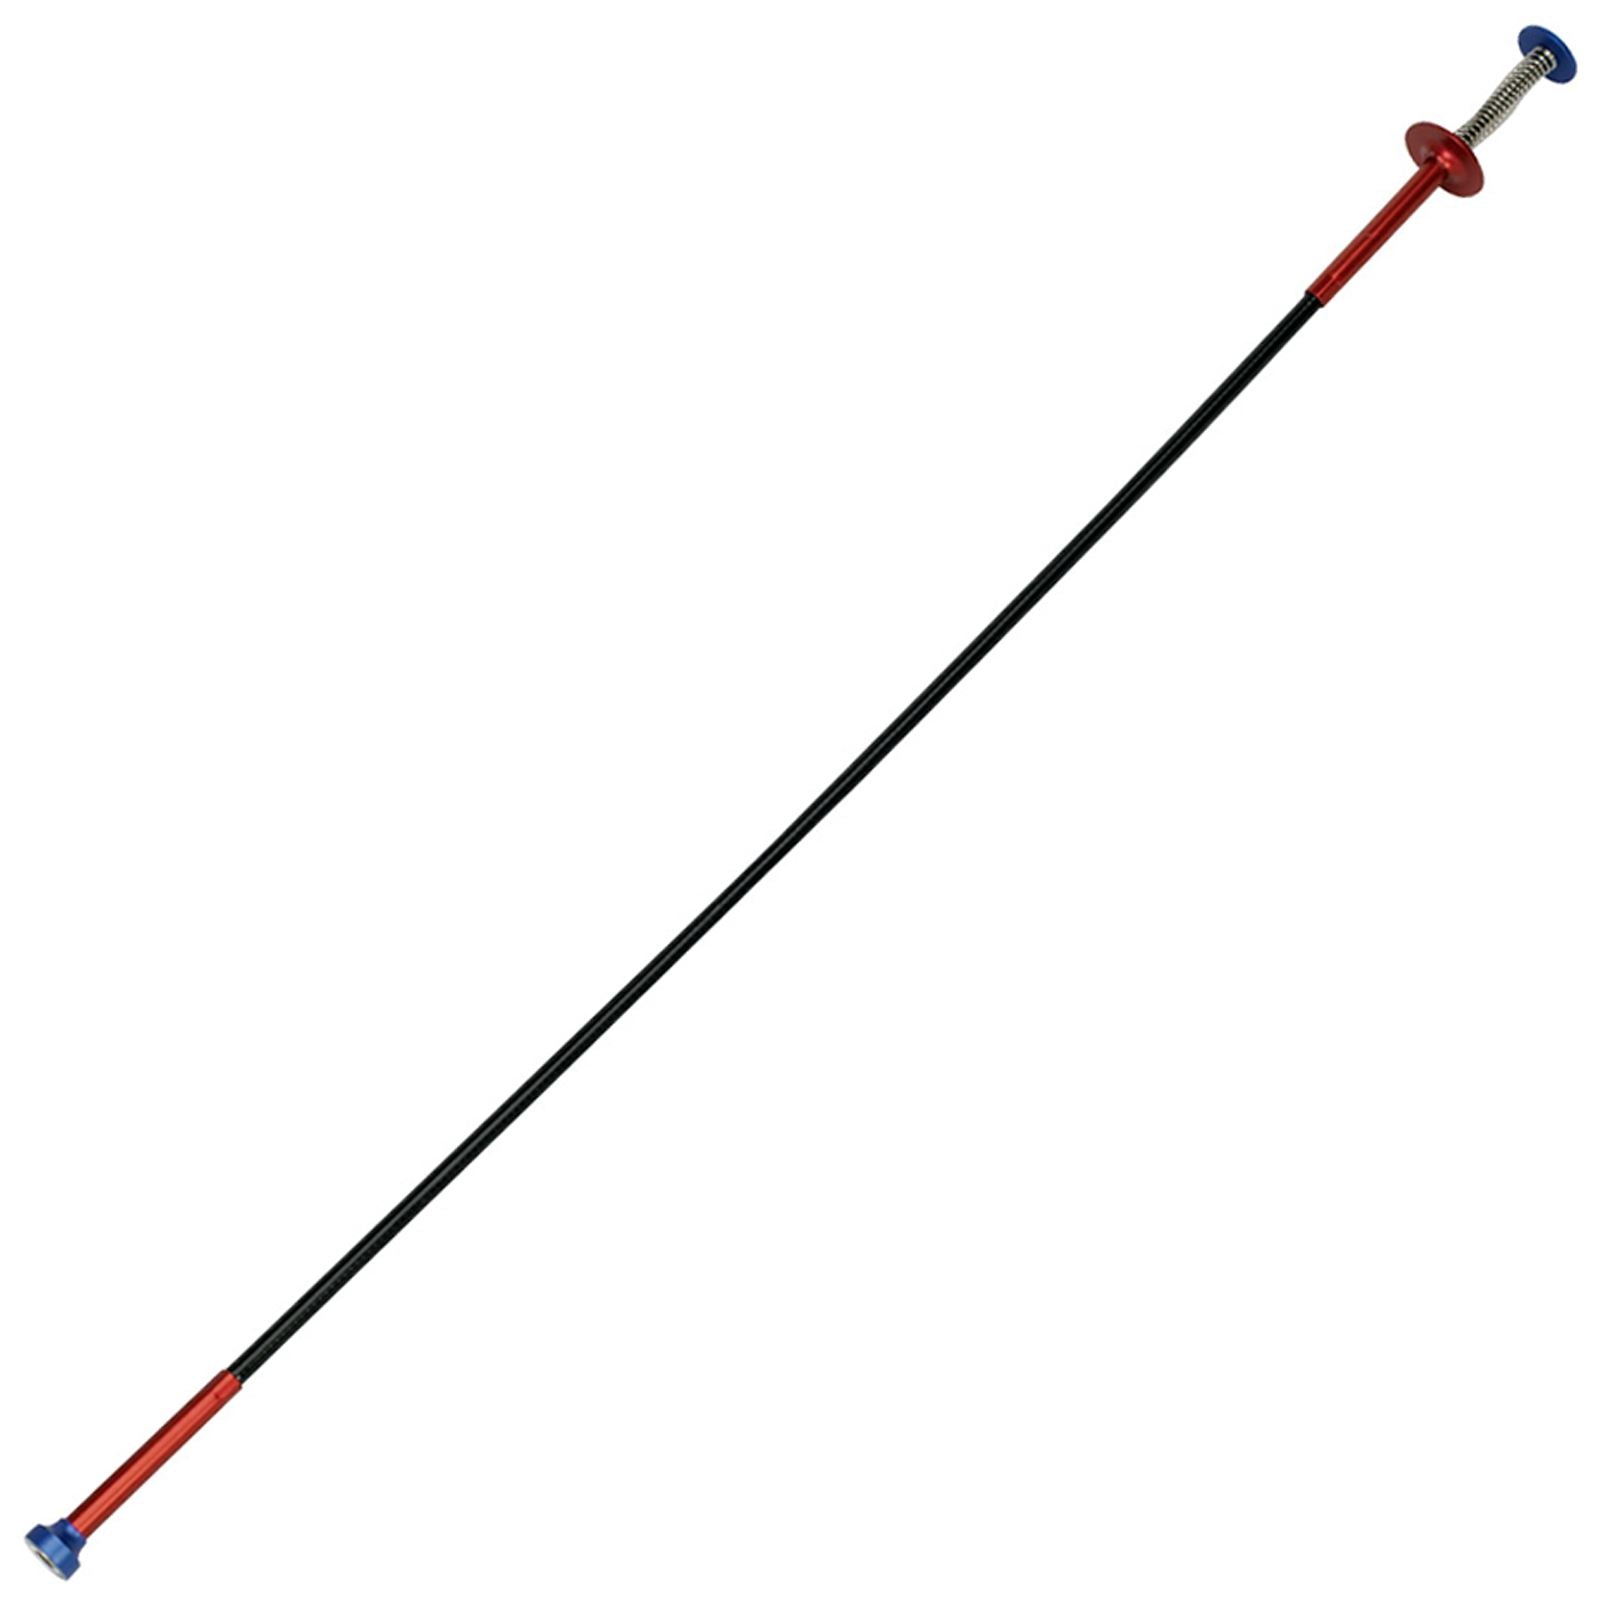 Sealey 700mm Flexible Magnetic Pick Up & Claw Tool Cable 0.7kg Garage Tools